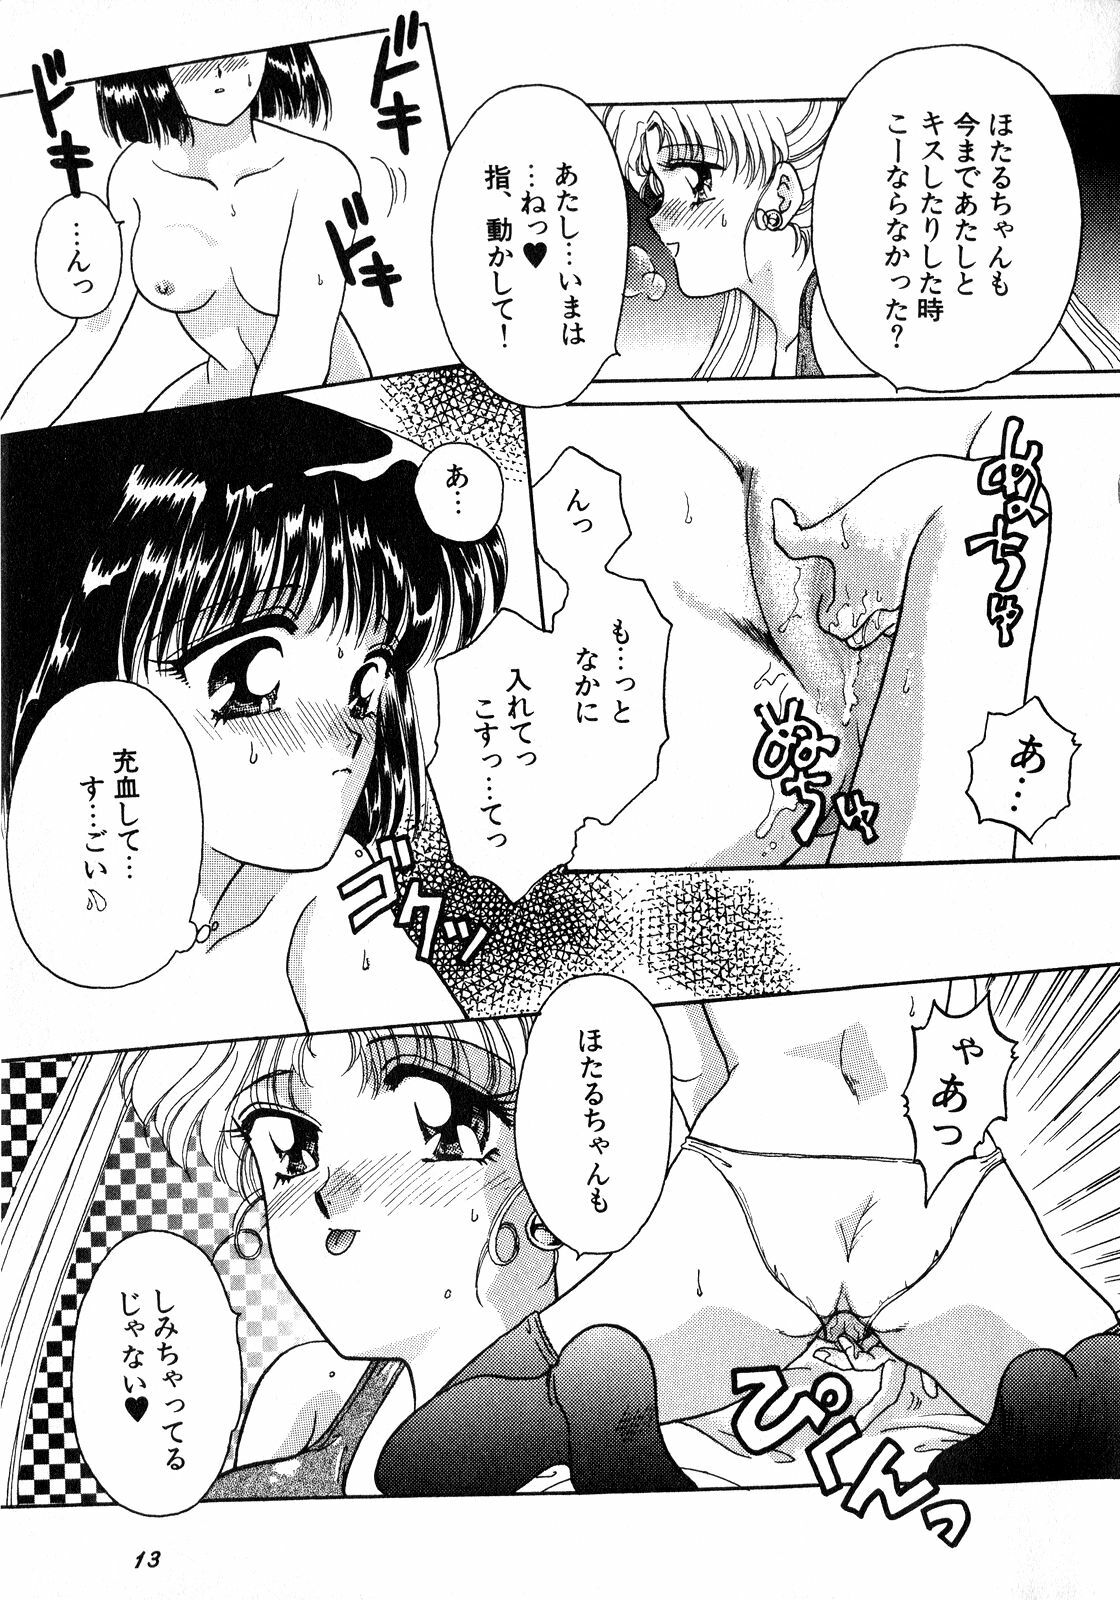 [Anthology] Lunatic Party 8 (Sailor Moon) page 14 full